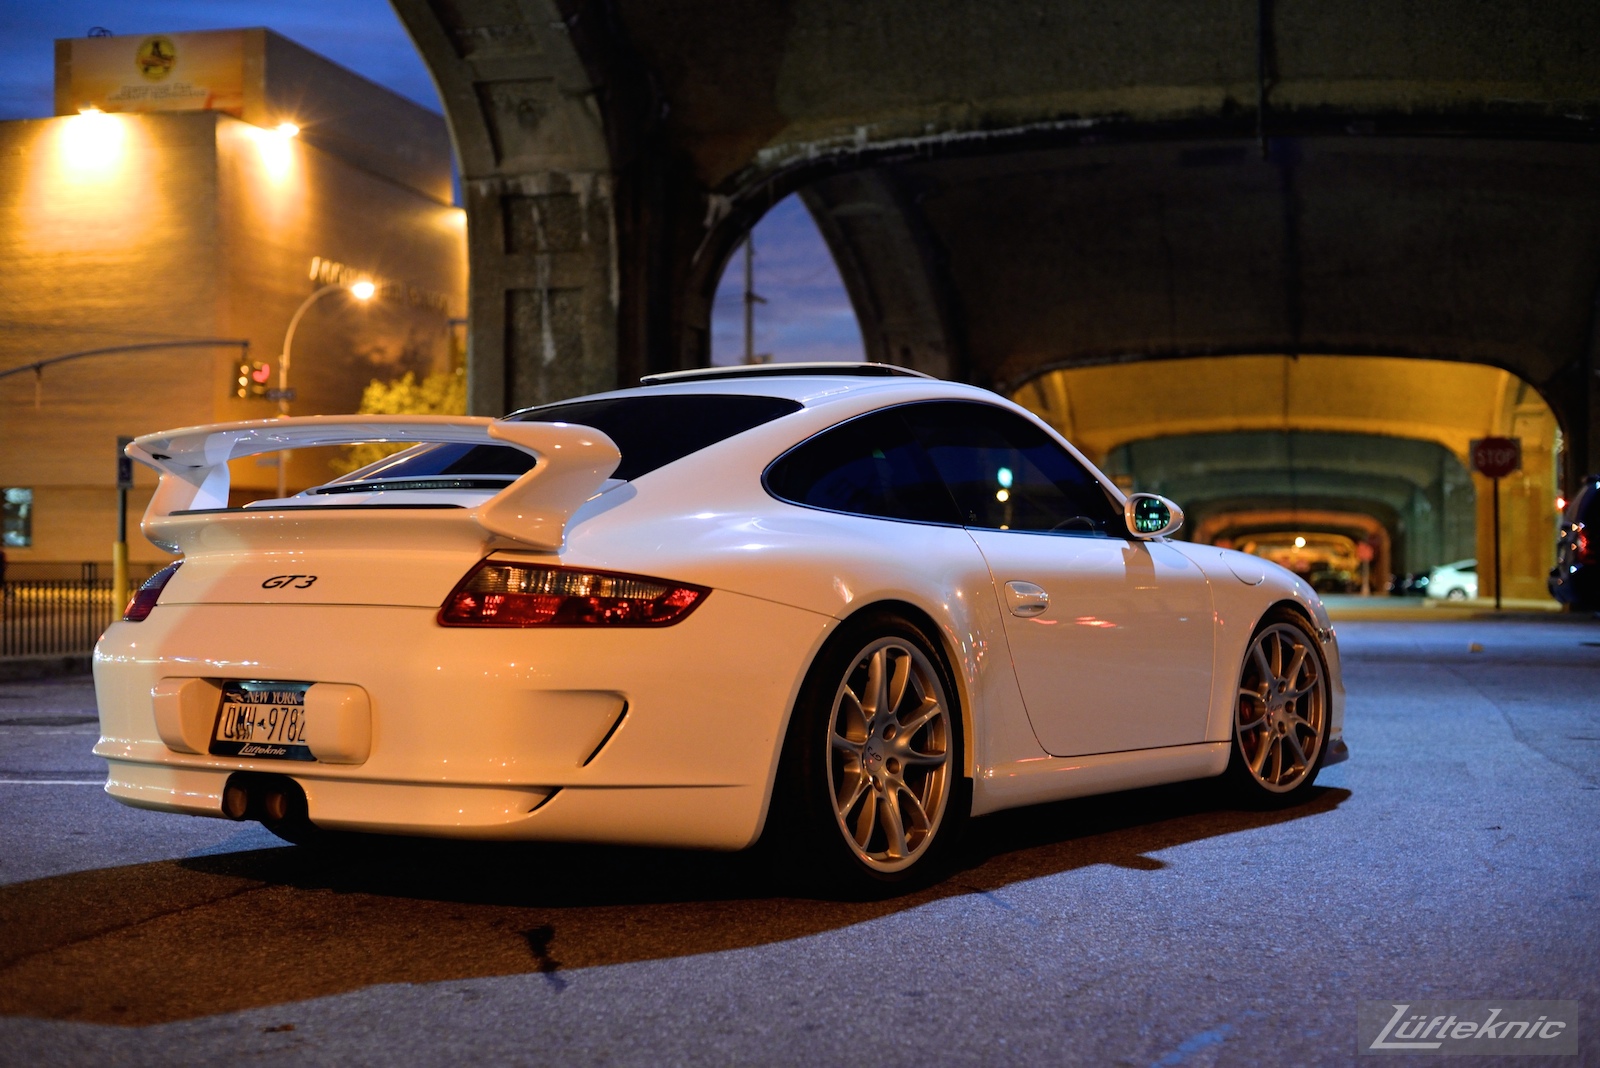 A white 997 GT3 viewed from behind under the 7 train bridge on Queens blvd at night.